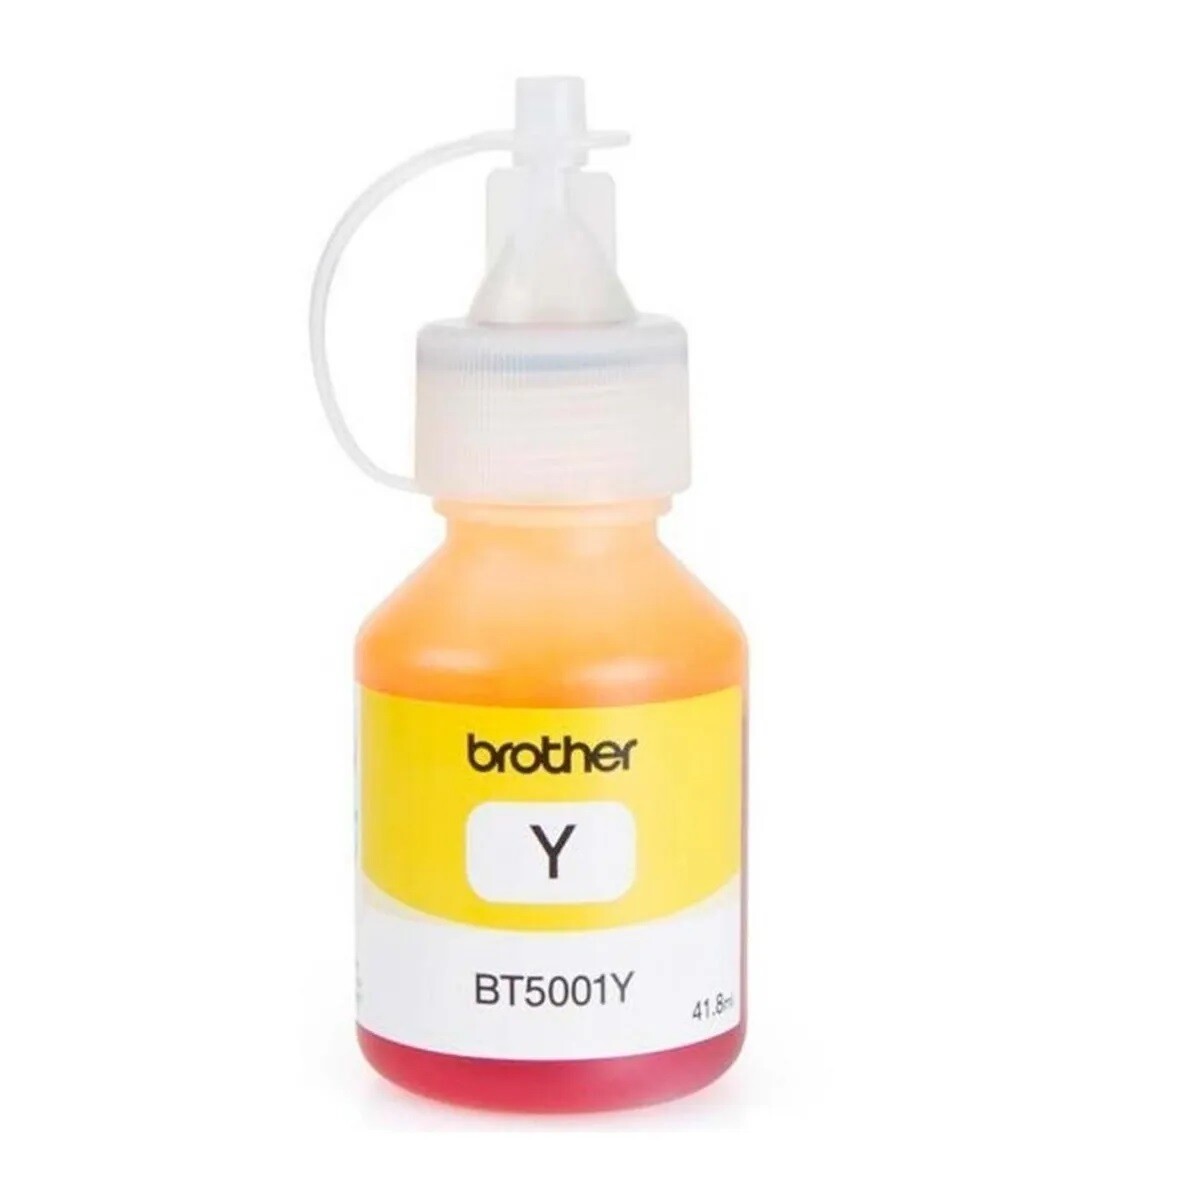 Botella De Tinta Color Yellow Brother Dcp-t310-t510w-t710w 